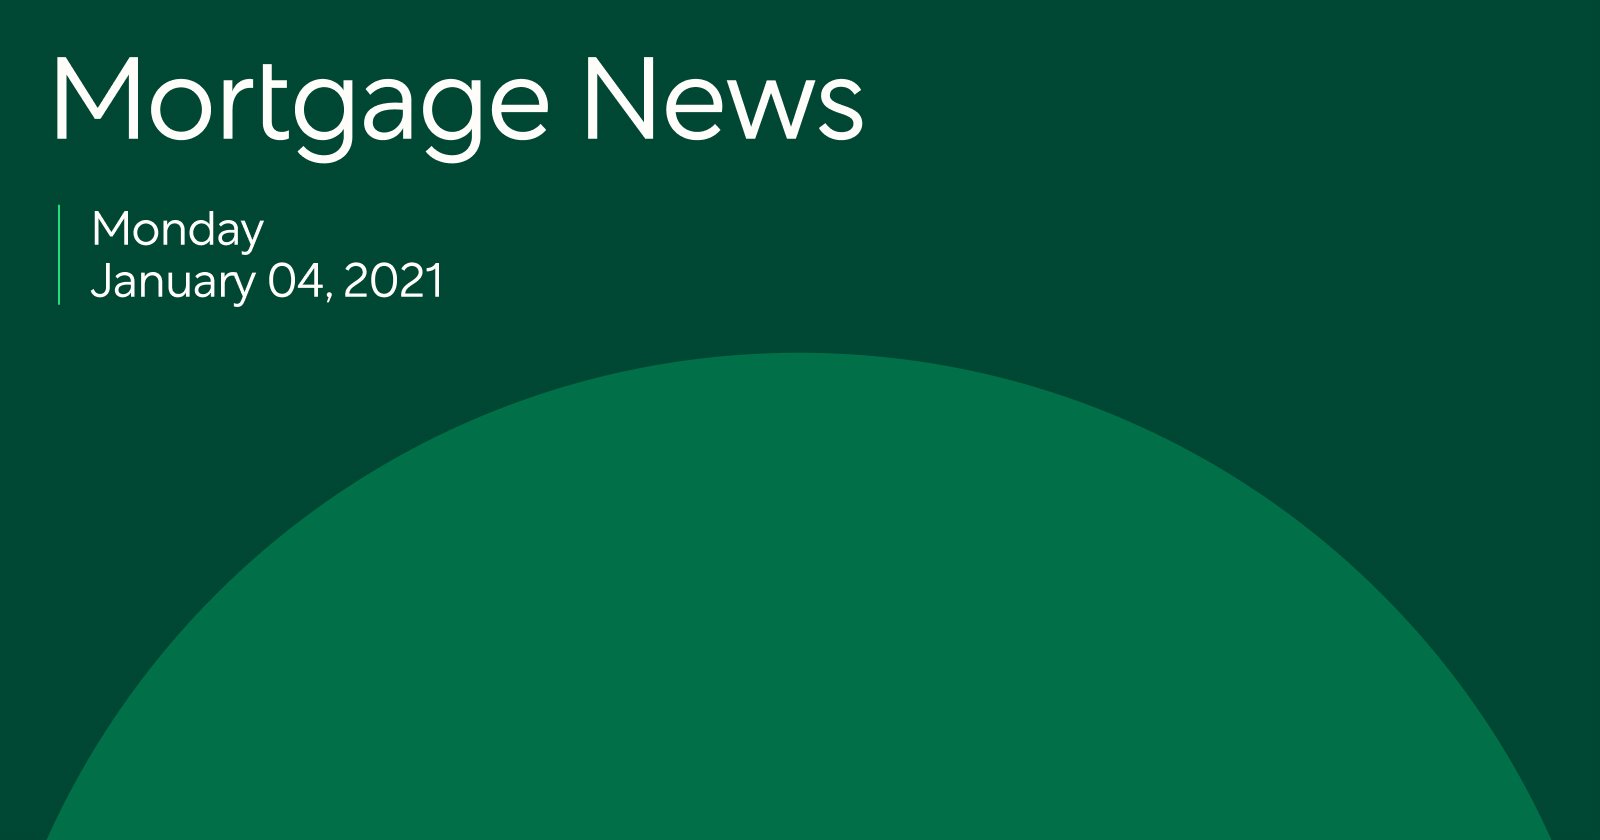 Mortgage News 1/04/2021: Why 2020 Was the Year of the Home